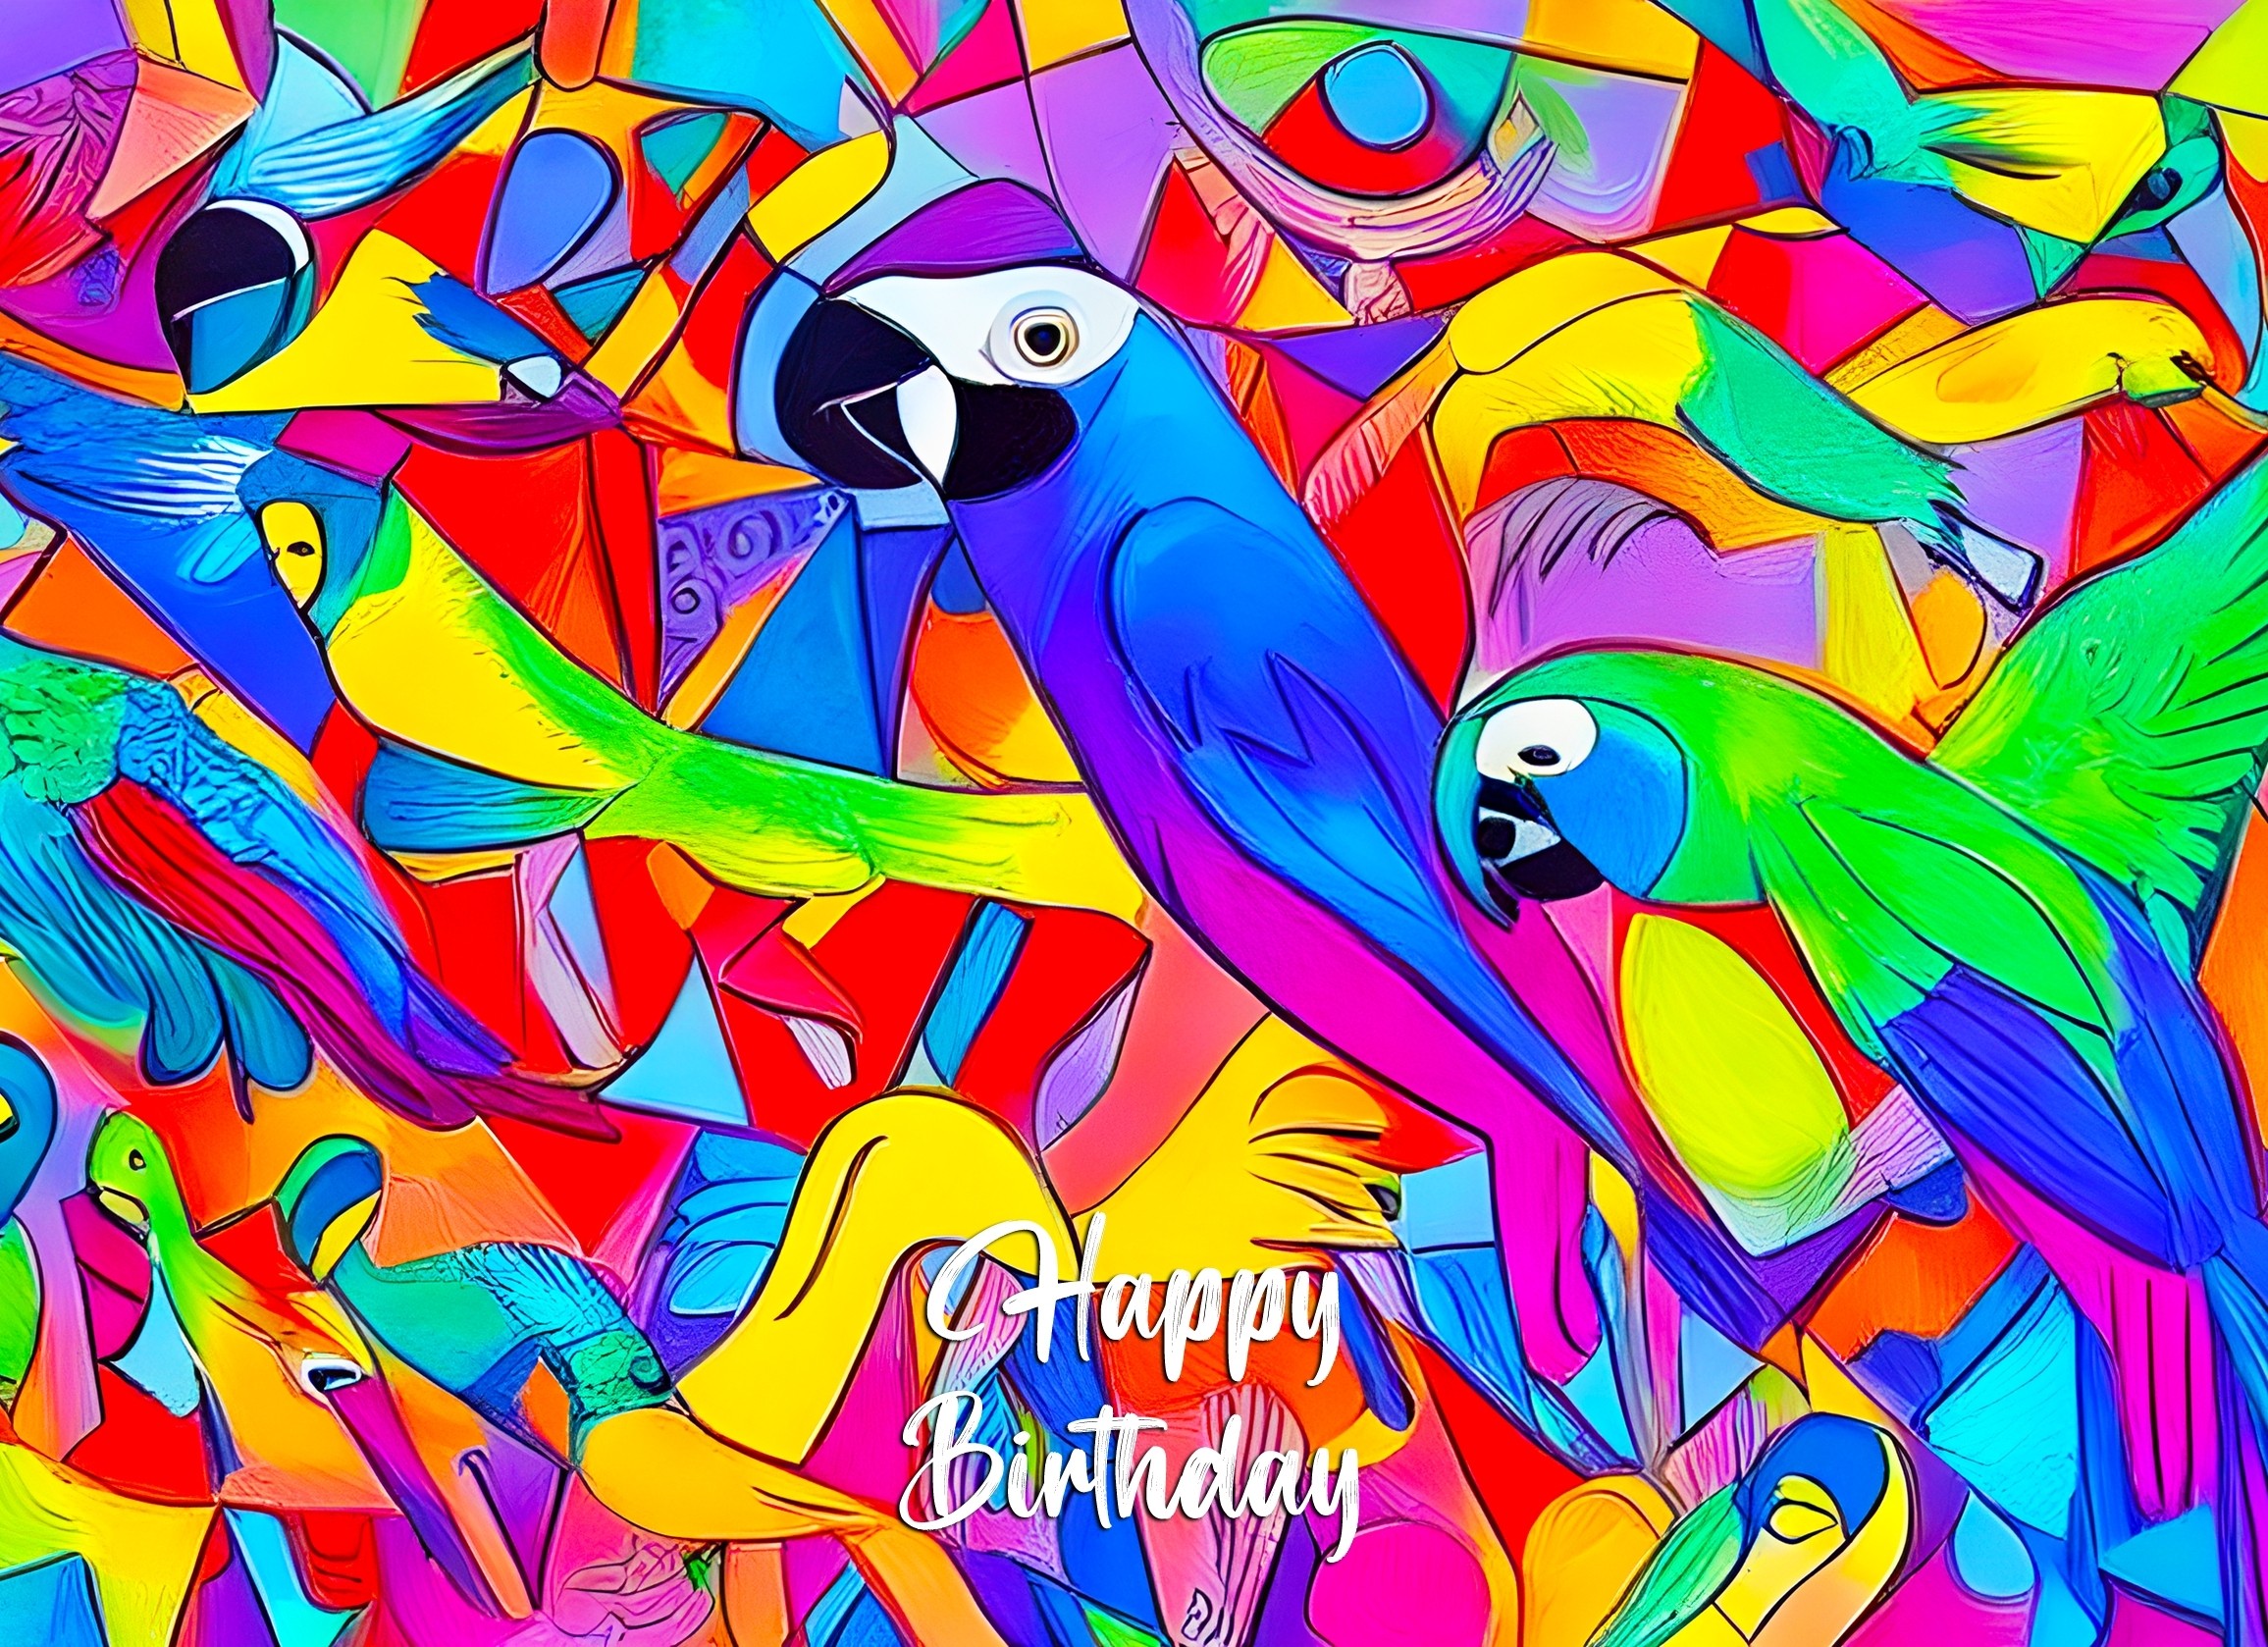 Parrot Animal Colourful Abstract Art Birthday Card